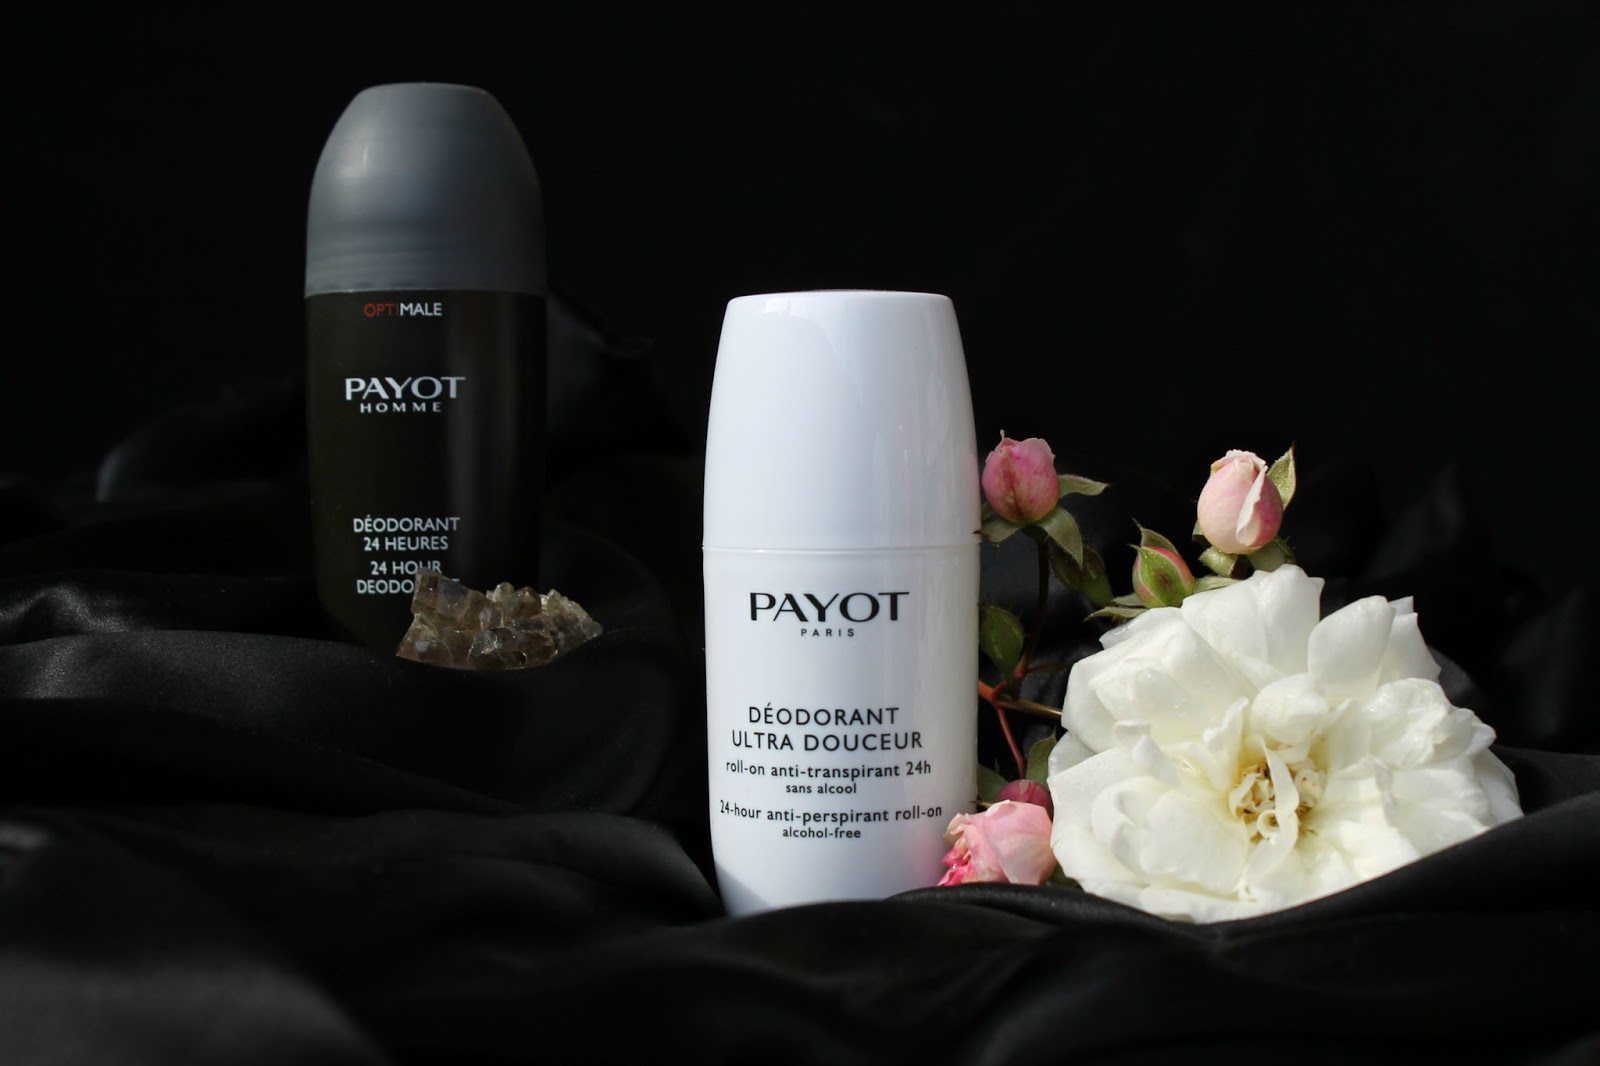 Payot deodorant Ultra-Douceur, Optimale Homme 24 Hour deodorant review / об...